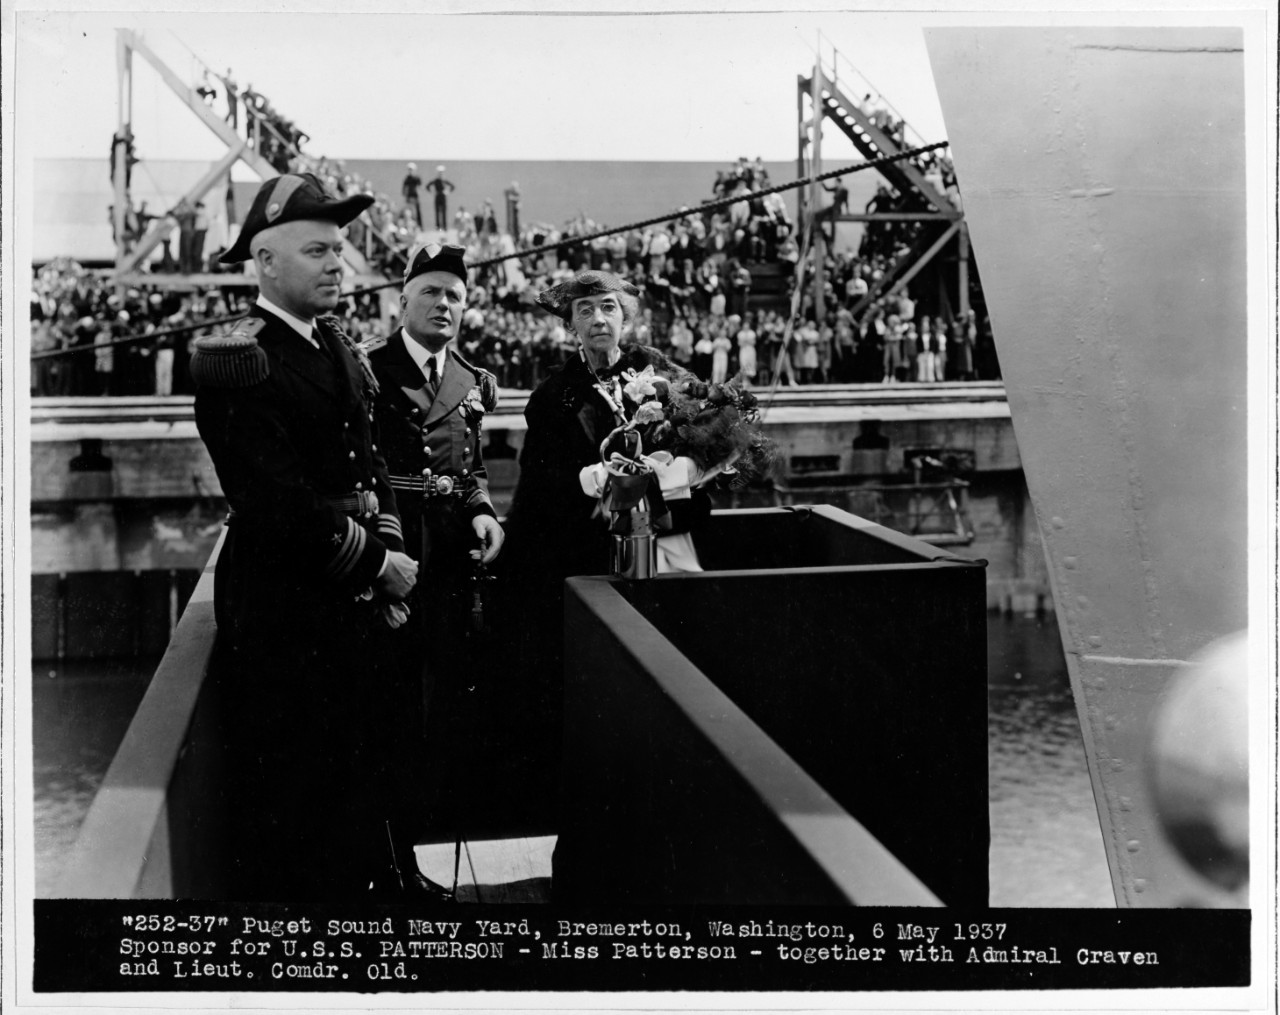 Miss Elizabeth P. Patterson, Sponsor of USS PATTERSON (DD-392), with Lieutenant Commander Old and Rear Admiral Craven